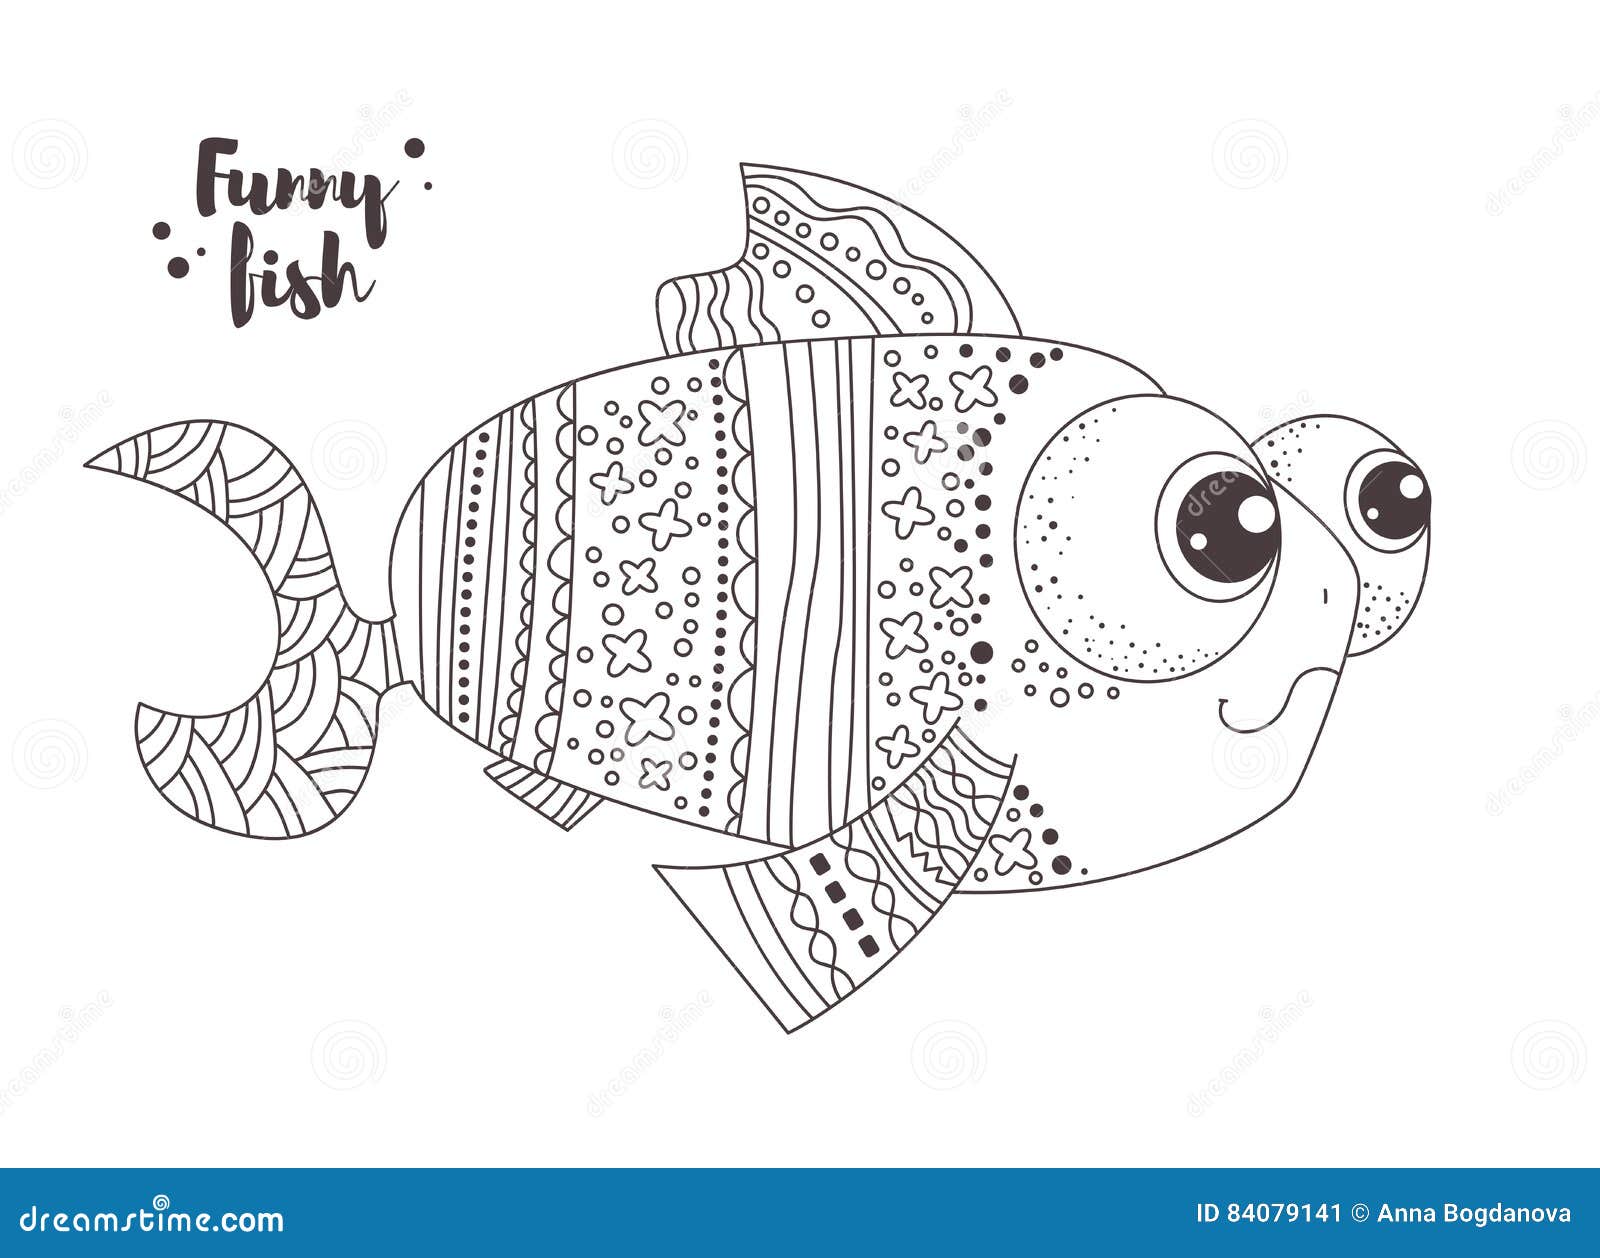 Funny Fish Coloring Book Stock Vector Illustration Of Cute